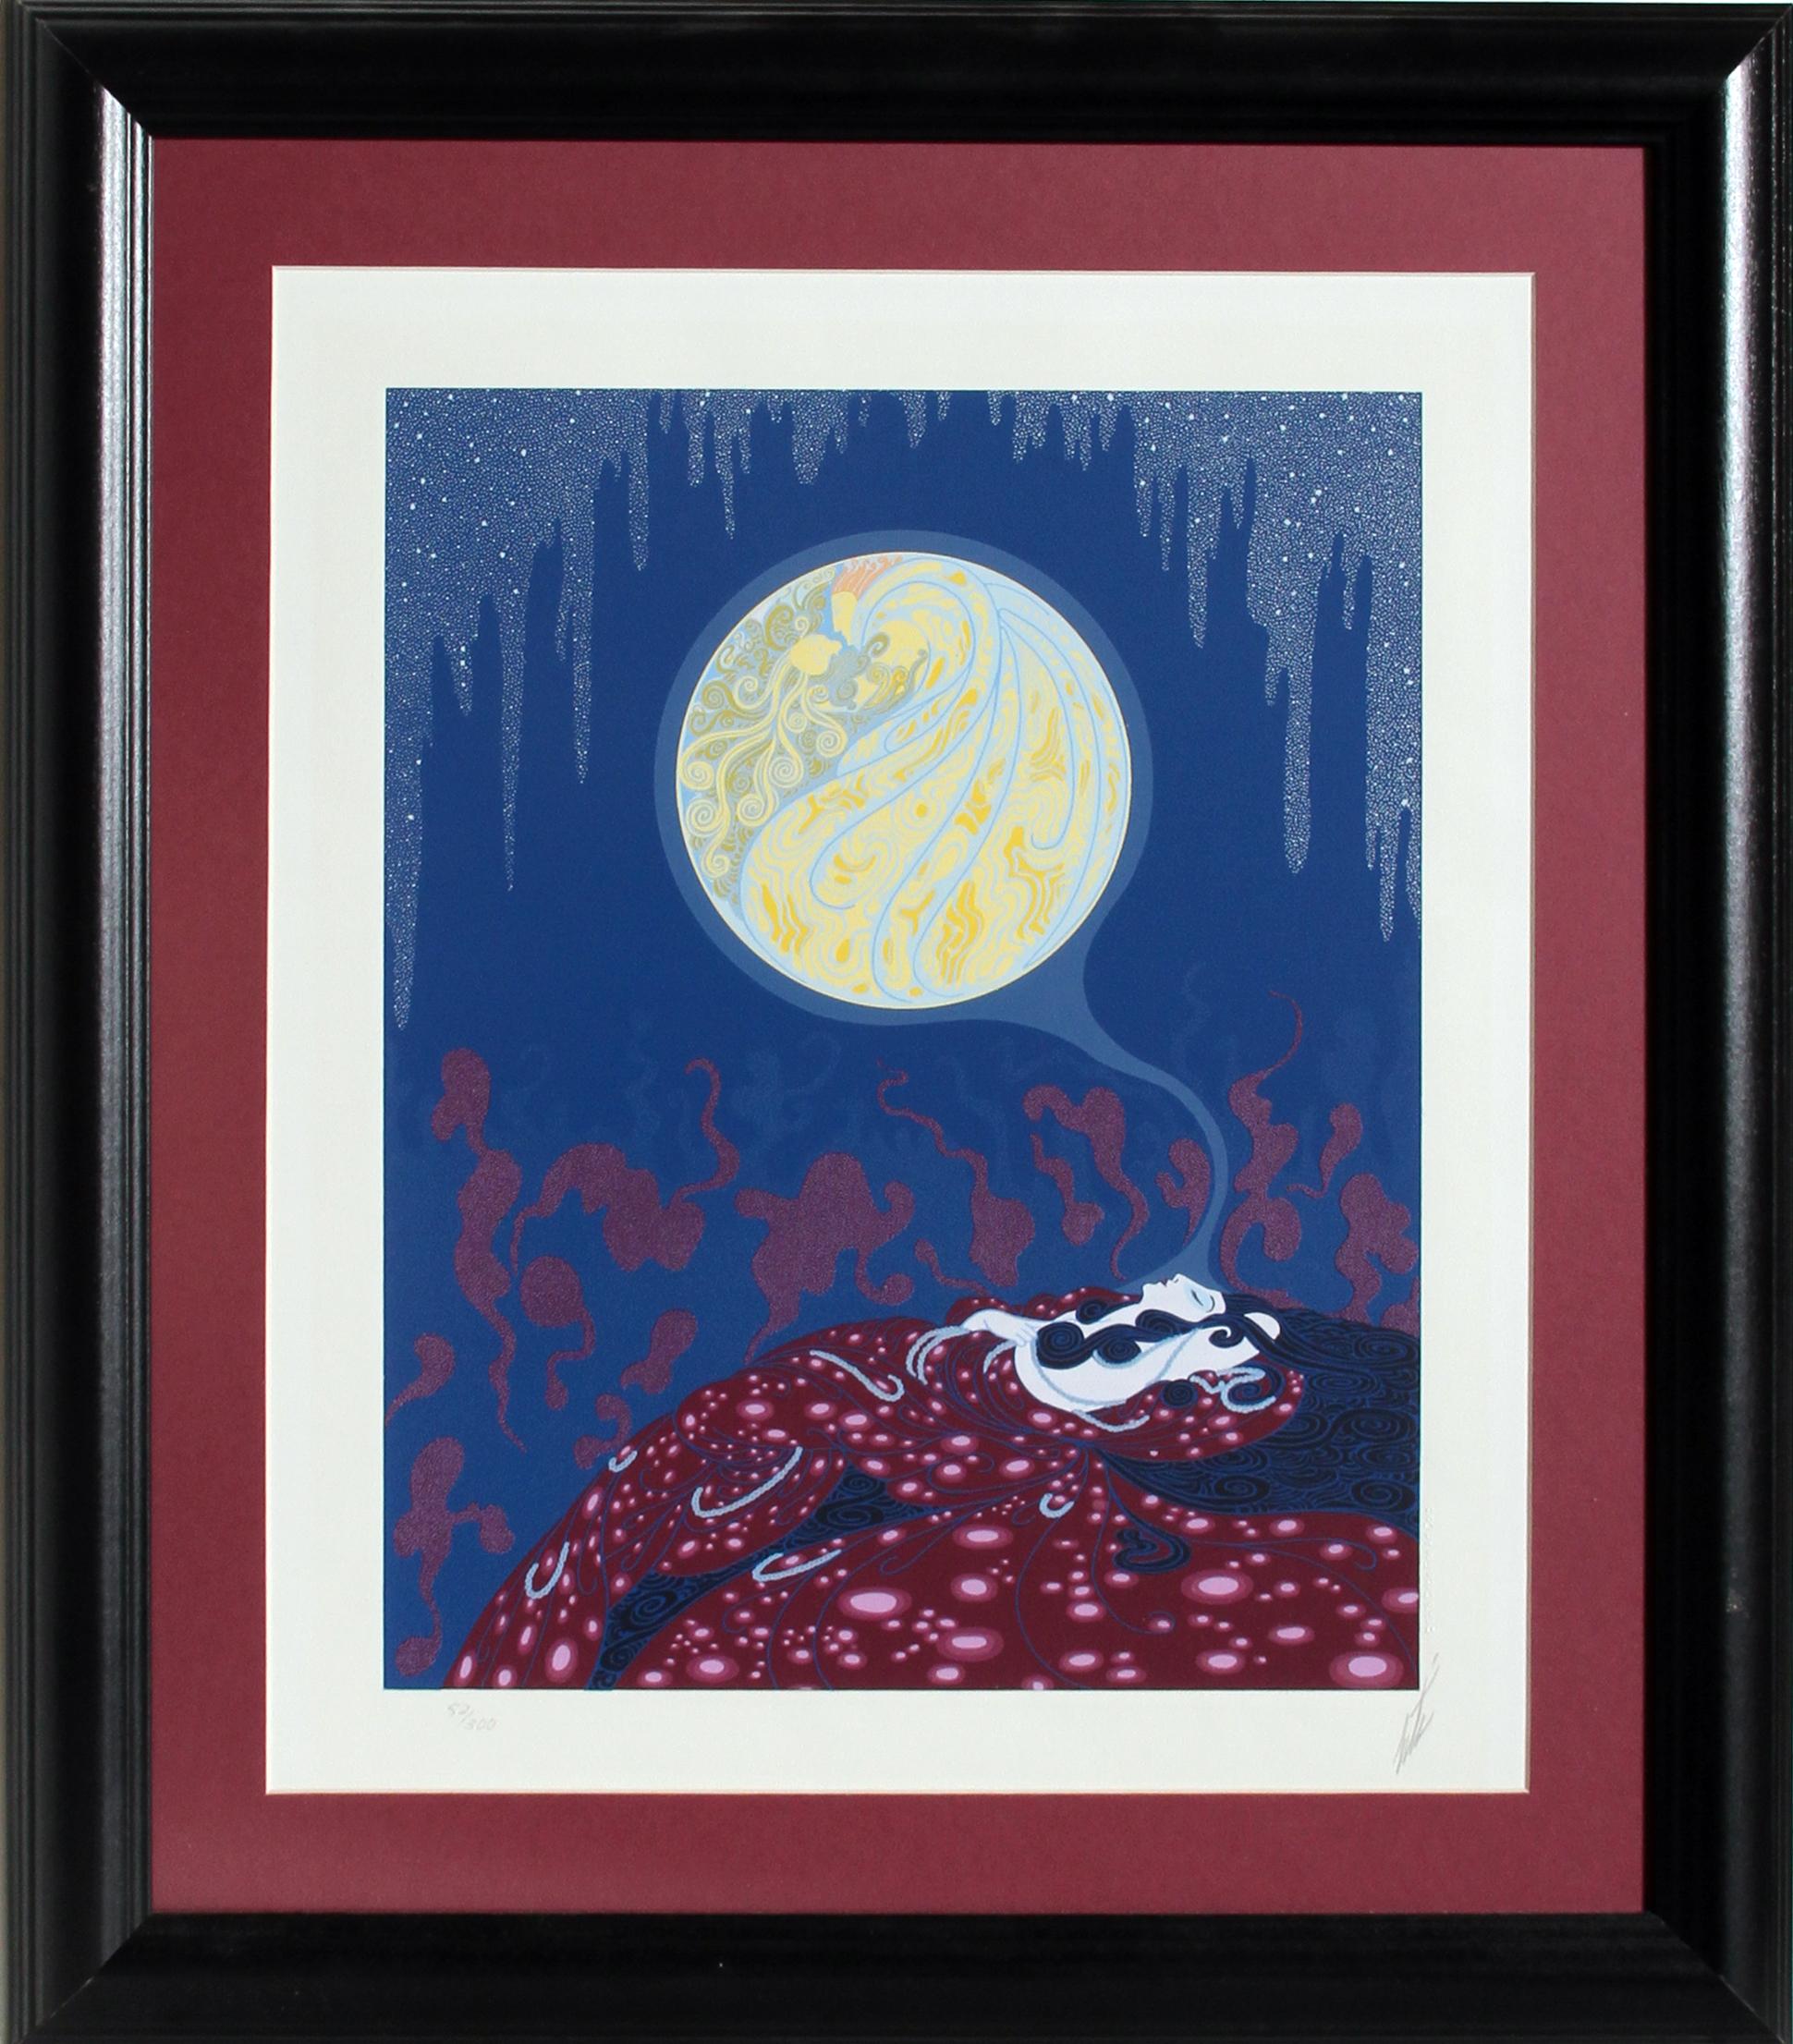 Artist:	Erte
Title: Earth's Dream from The Twenties Remembered Again Suite
Medium:	Serigraph, Signed and Numbered in pencil 
Edition: 52/300
Size:	20.5 x 17 inches
Frame: 28 x 24.5 inches